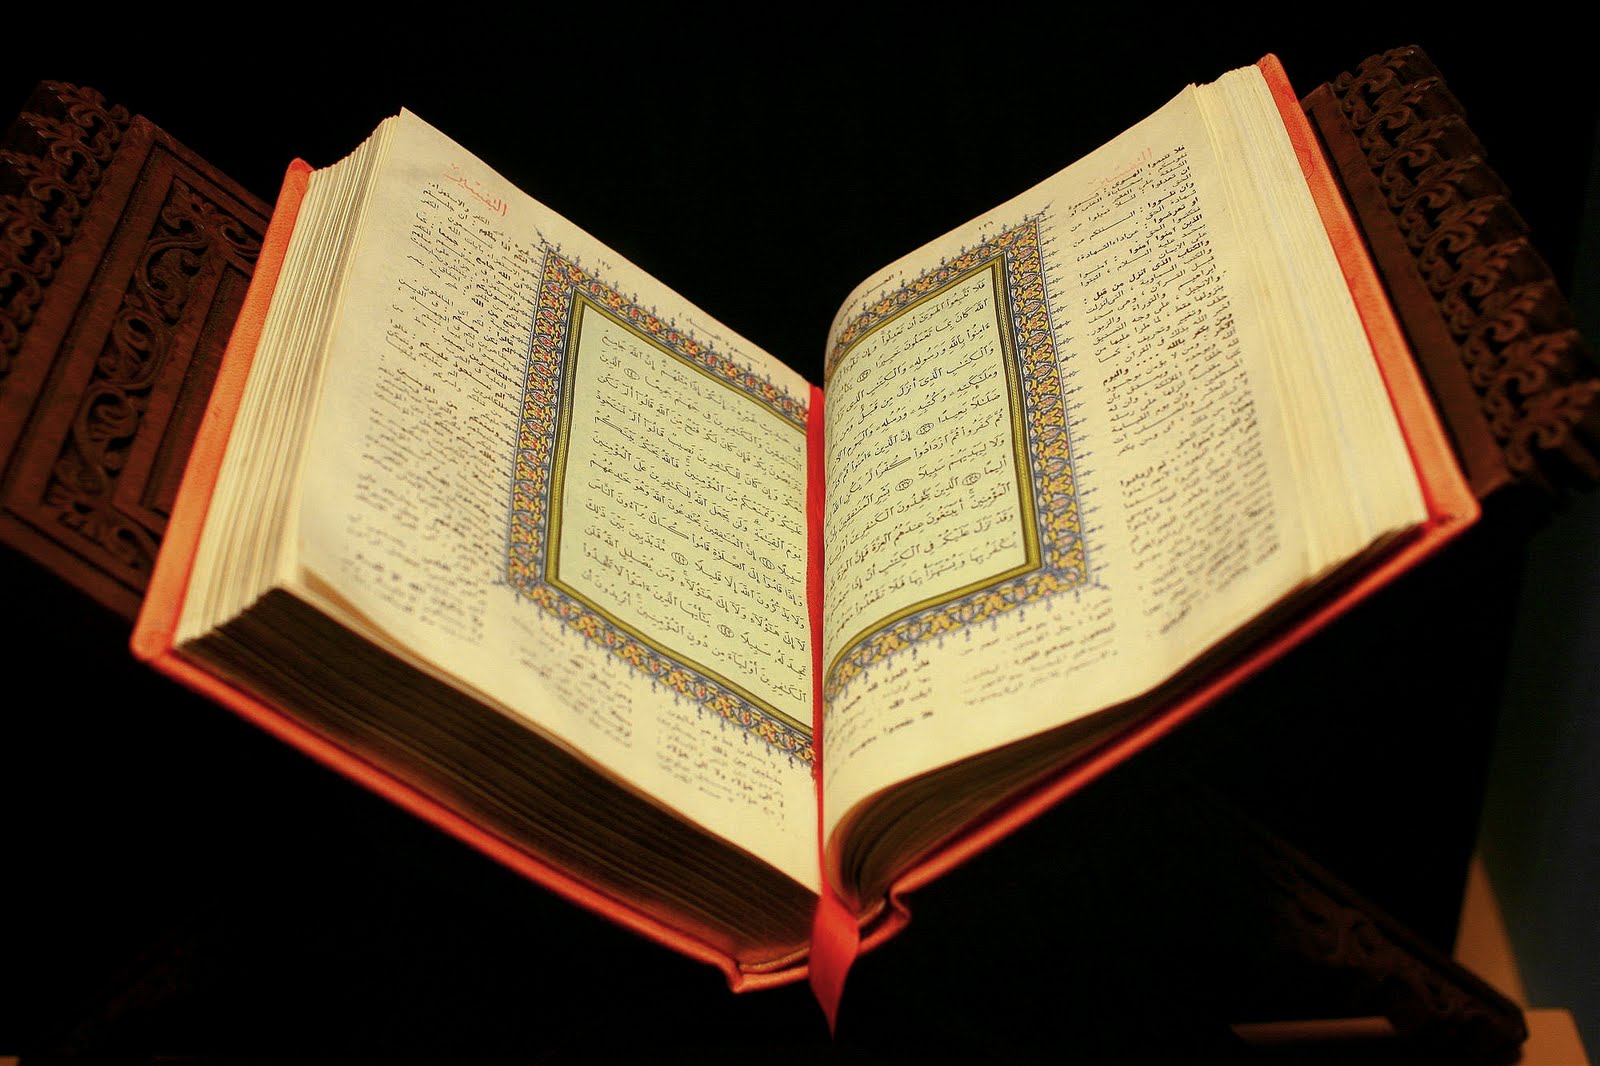 Surat Al-Fatihah is the gist of the Qur'an. It summaries everything in the Qur'an. In this Show, Sheikh Moutassem Al-Hameedi comments on this Surah and the lessons we can learn from it. 